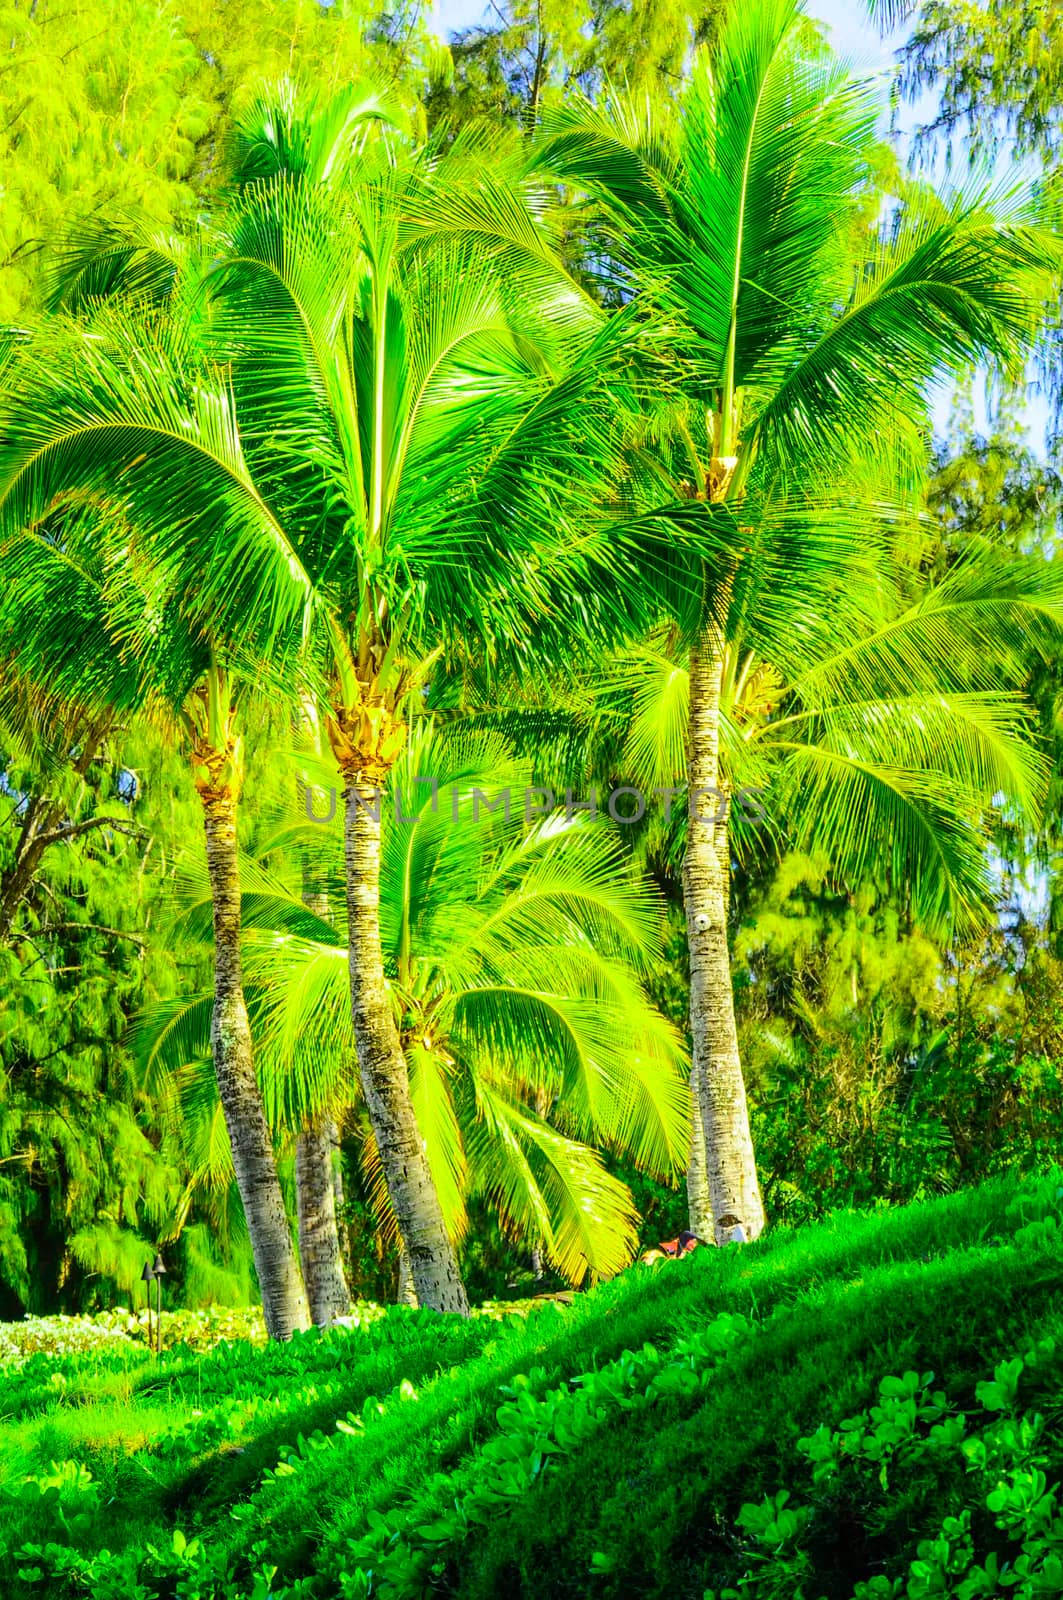 Tree scene in Maui fo Palms and other vegetation by cestes001